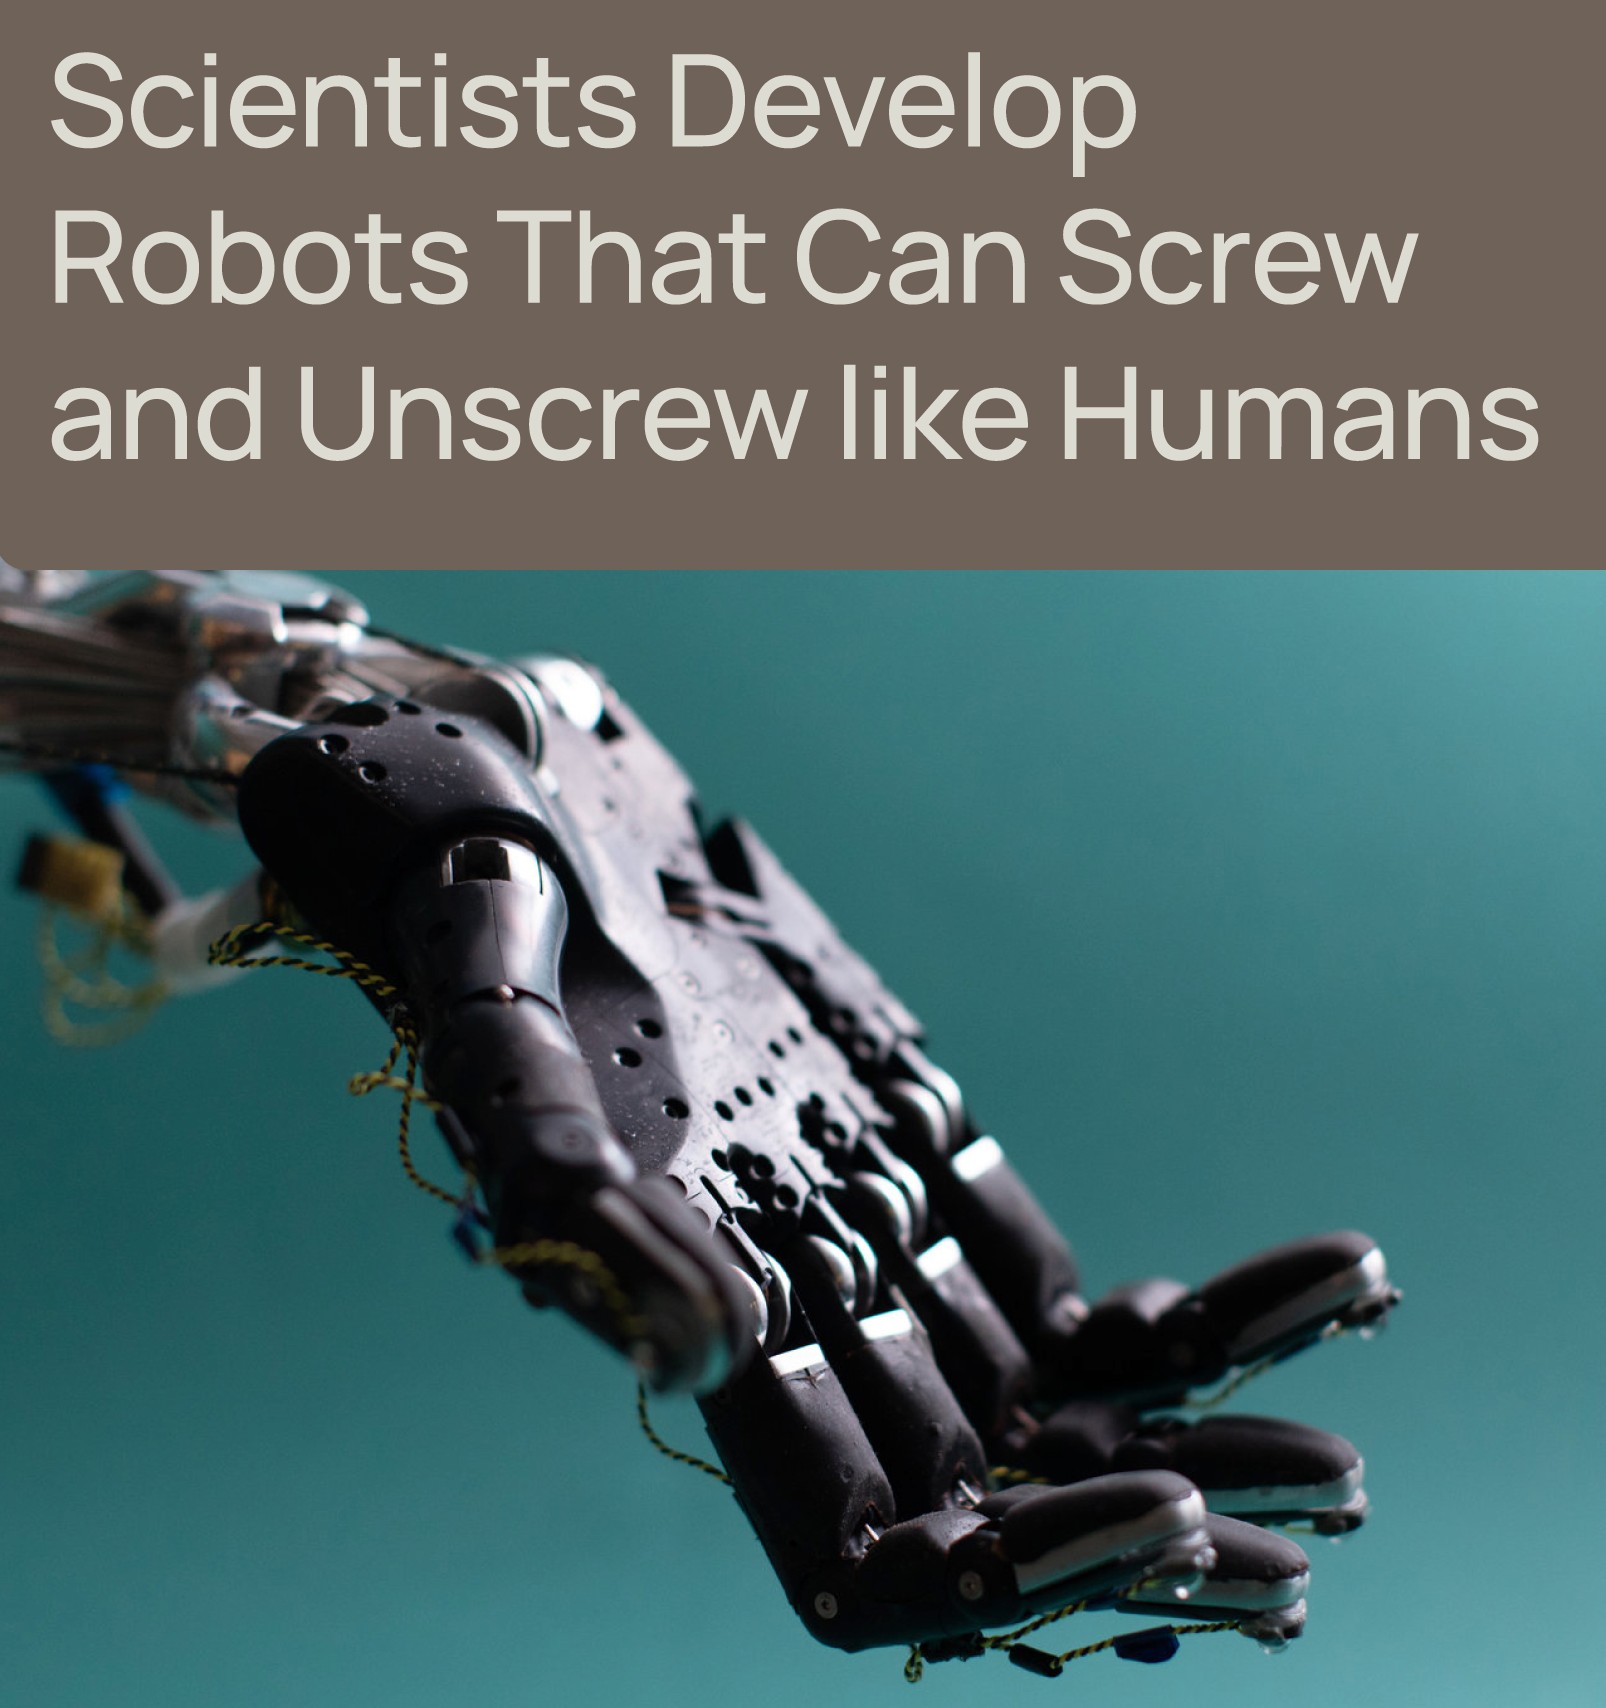 Scientists have developed robots that can screw and unscrew like humans